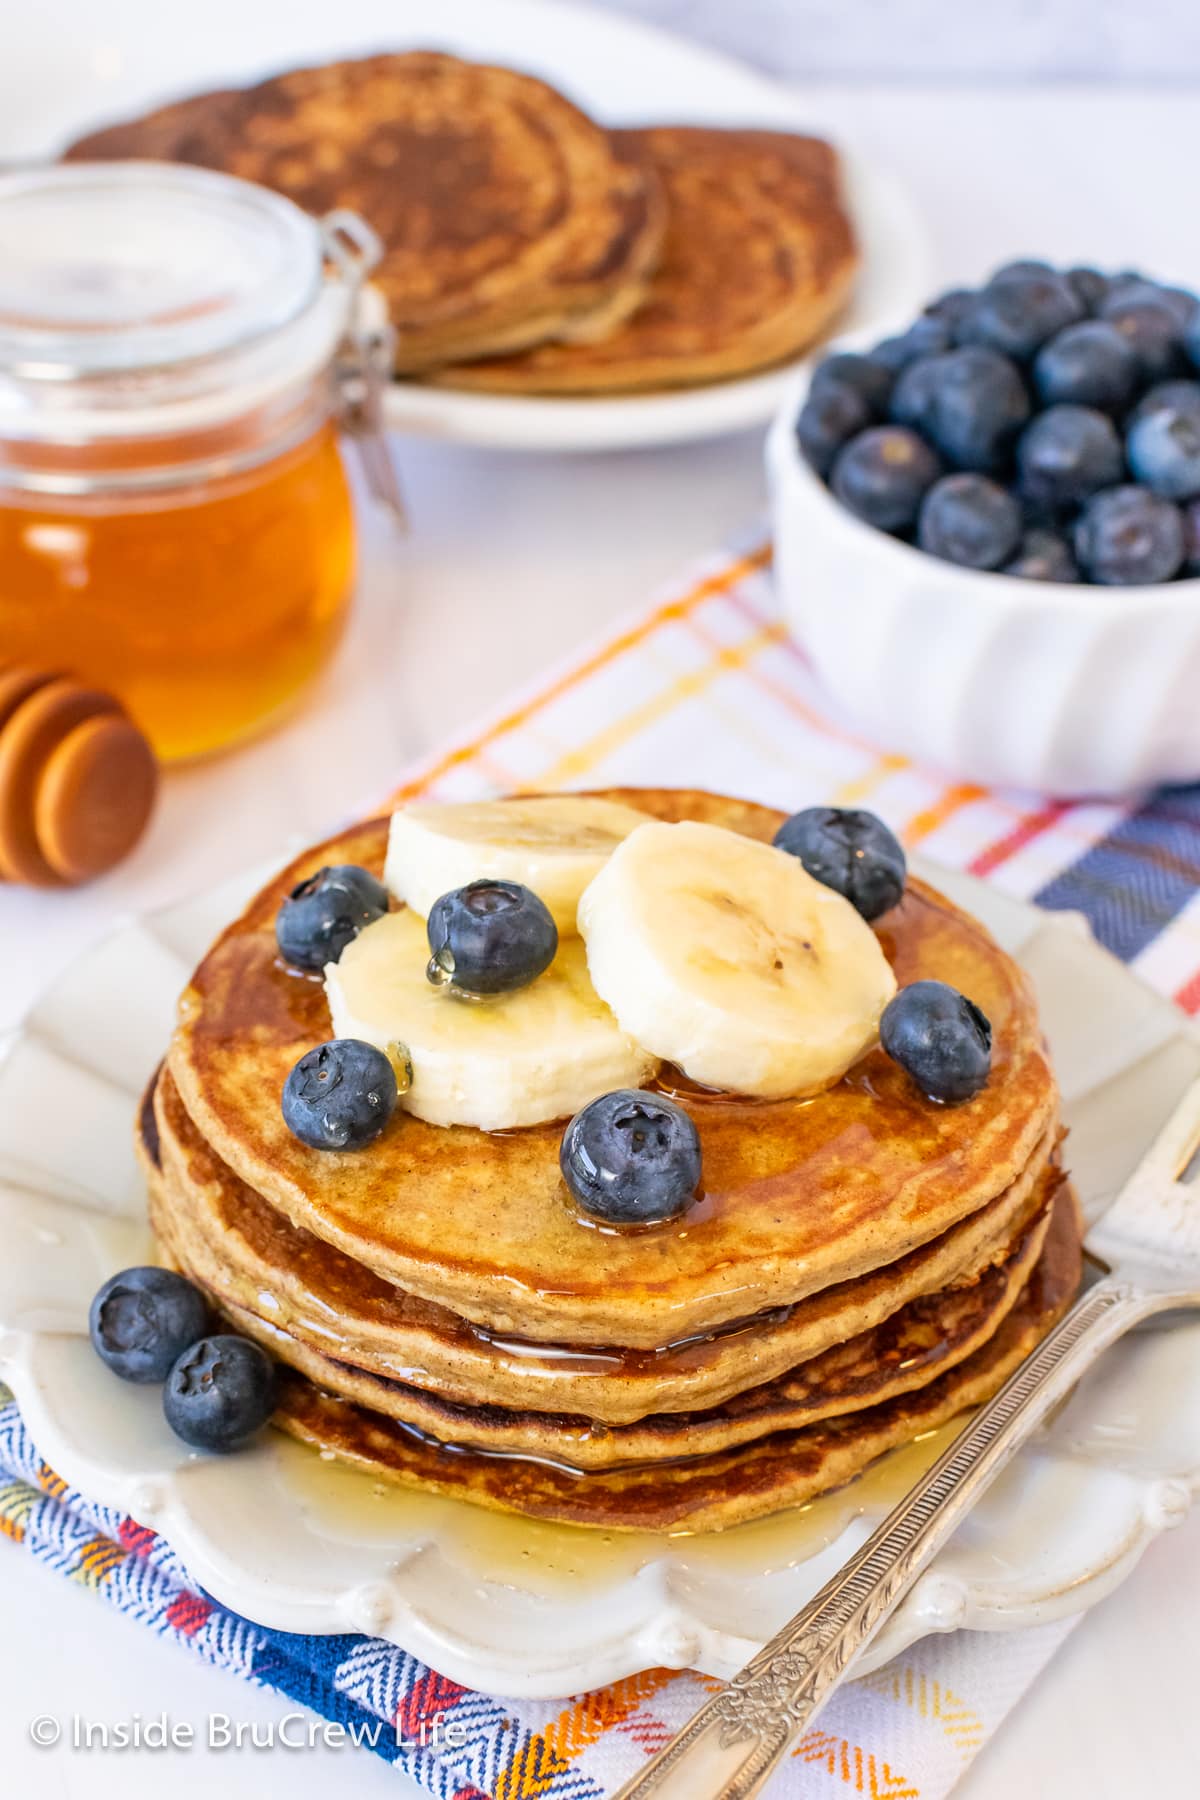 Pancakes on a white plate with blueberries and banana slices.